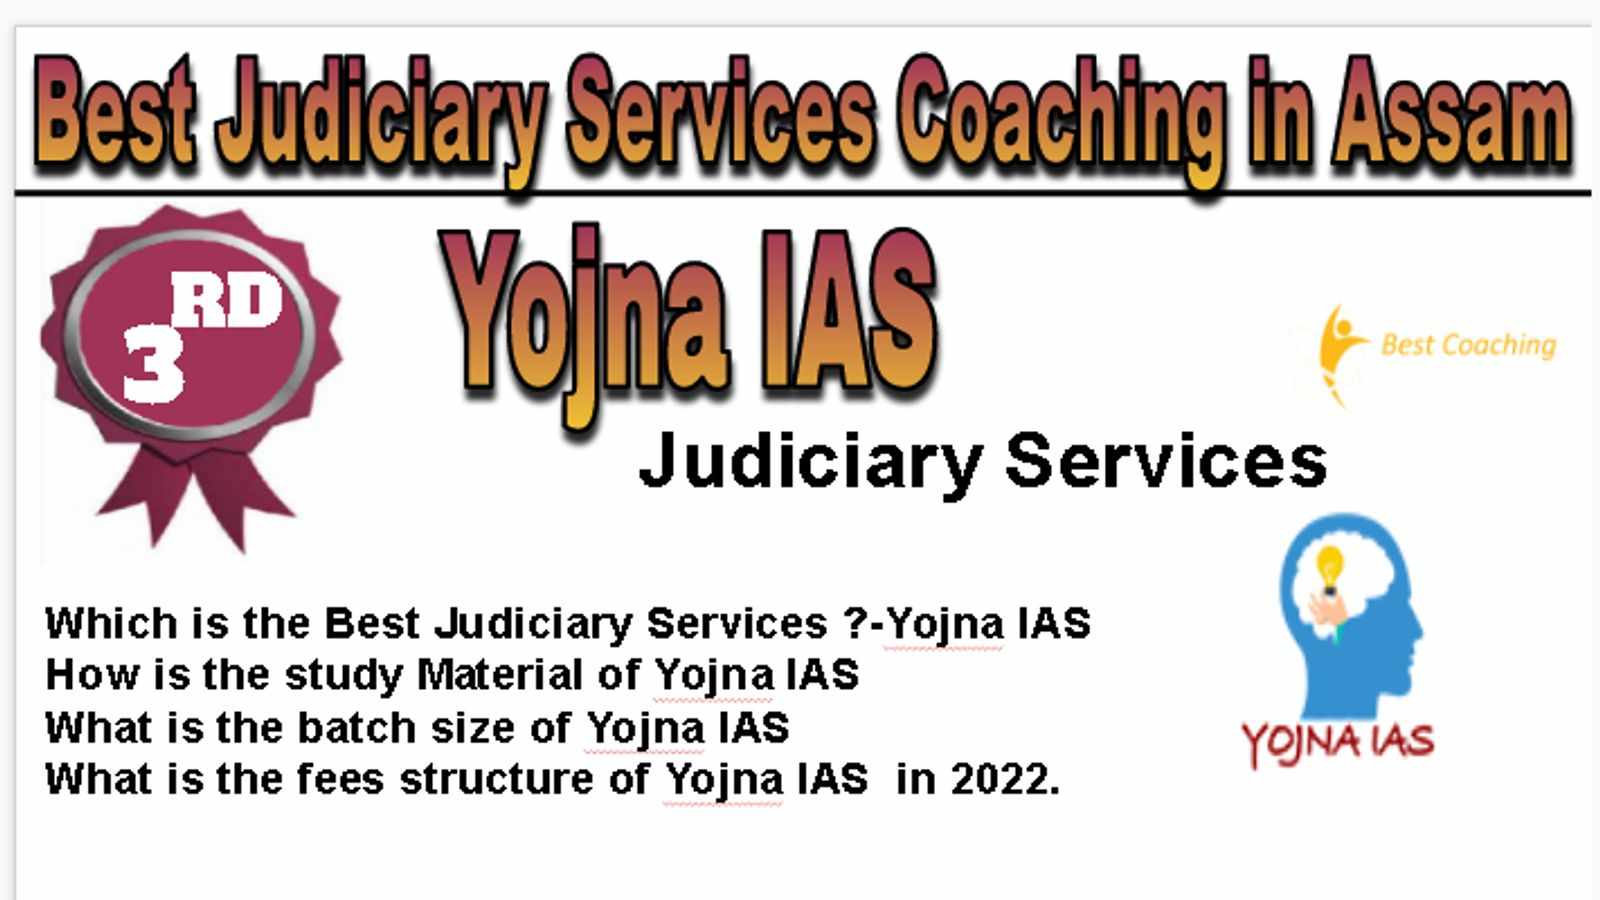 Rank 3 Best Judiciary Services Coaching in Assam